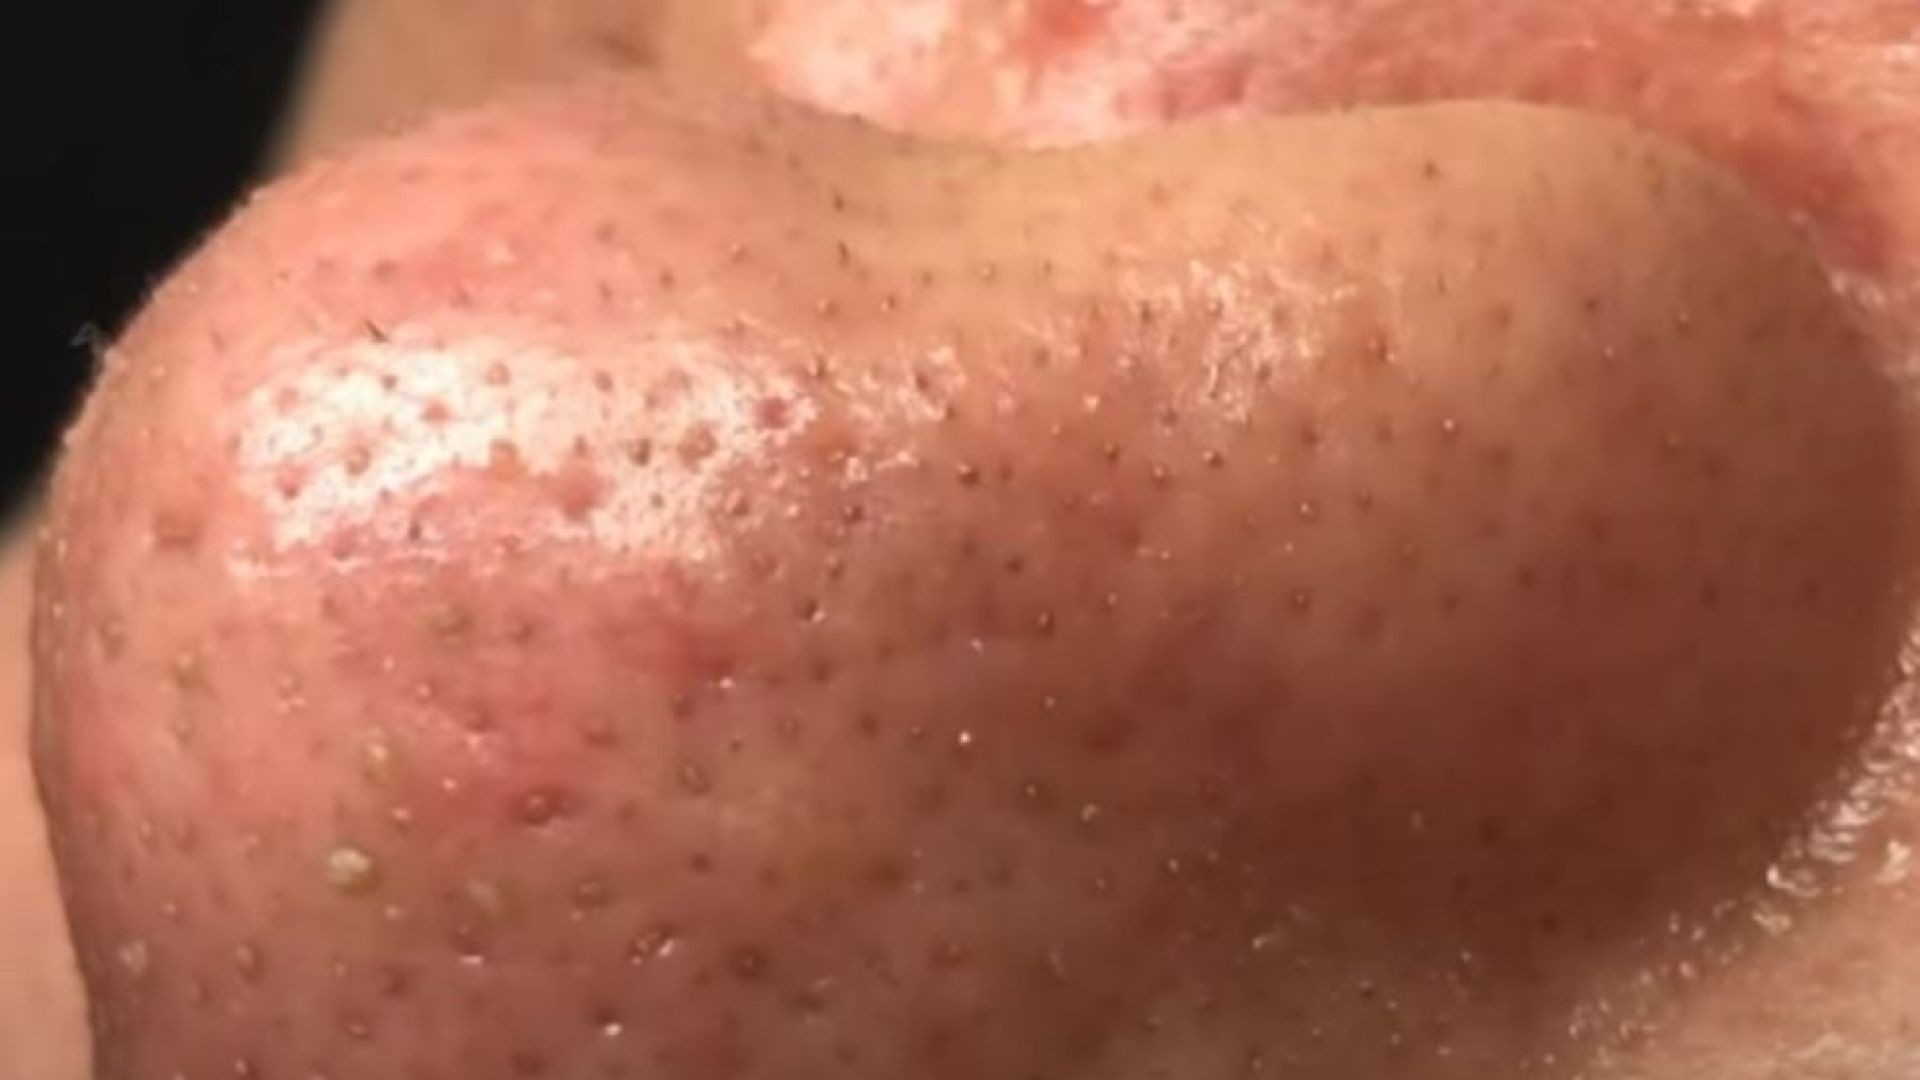 Volume from a small nose pimple